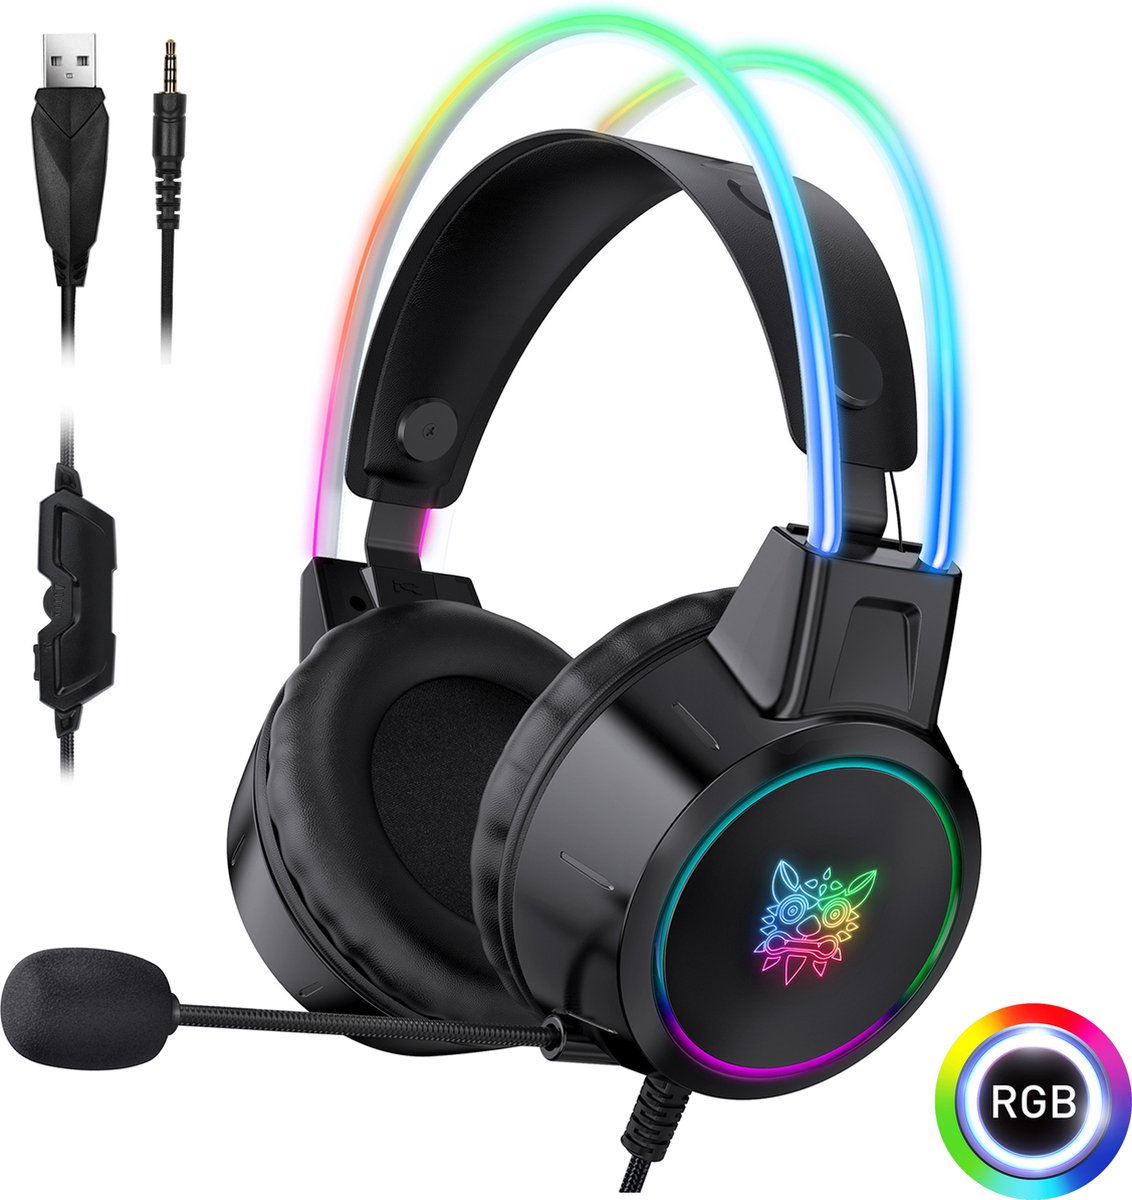 Gavury RGB X15 PRO Koptelefoon - RGB led verlichting - Voor PS4 PS5 en XBOX One Gaming Hoofdtelefoon - Professionele Gaming Headset - Surround Sound & Noise cancelling headset